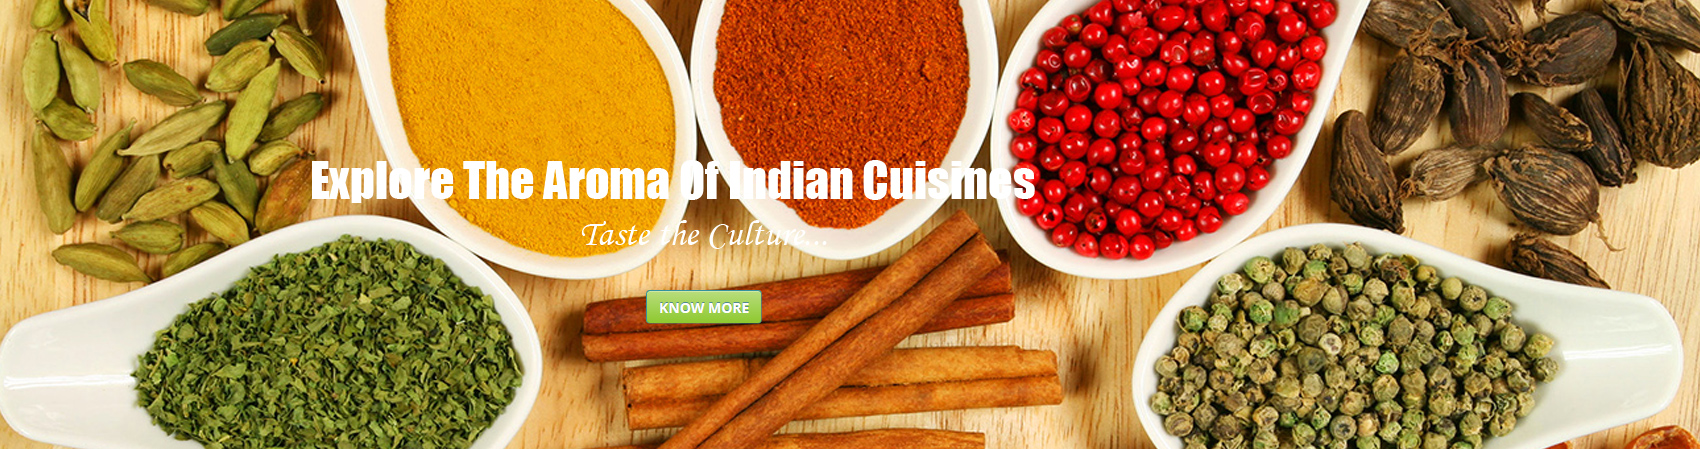 Explore The Aroma Of Indian Cuisines